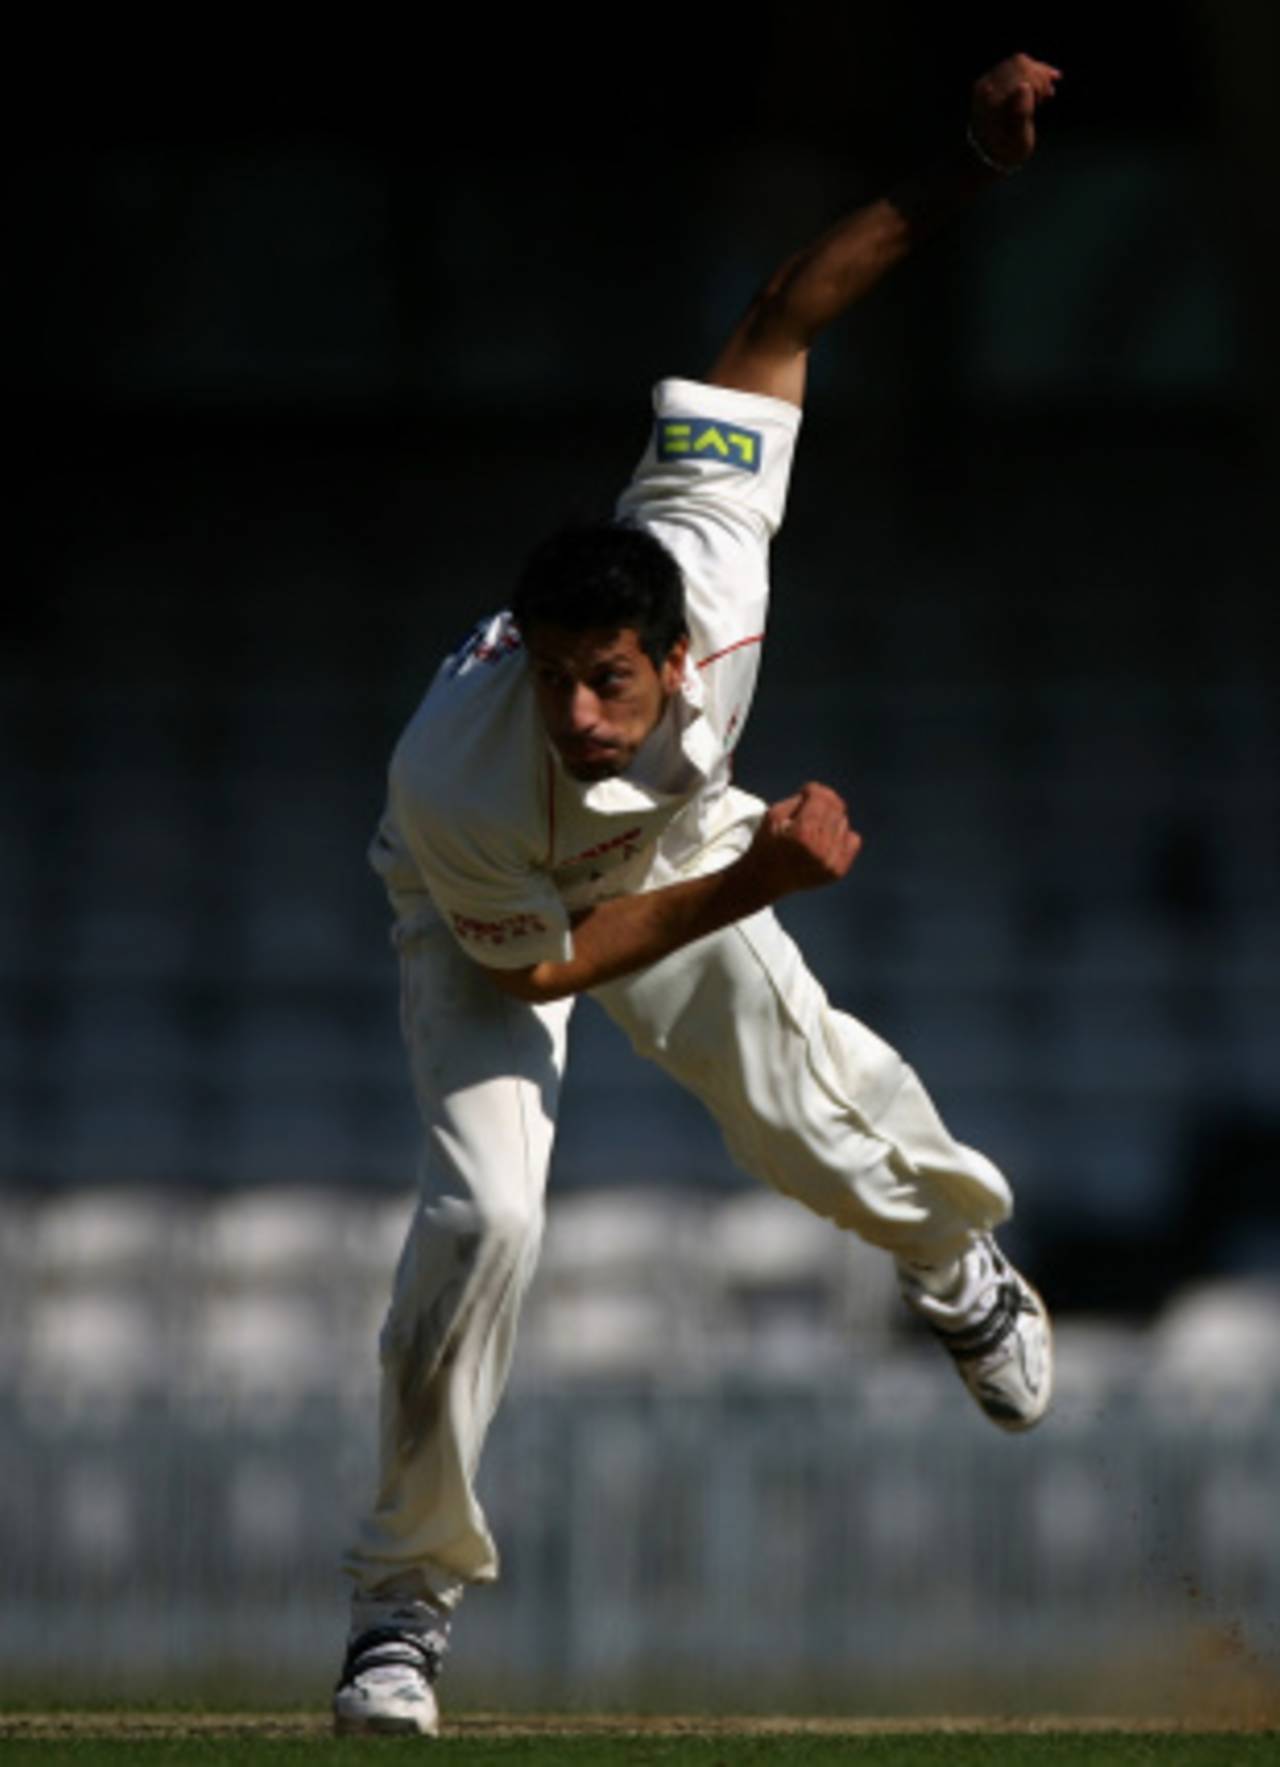 Sajid Mahmood went wicketless in the first innings, Surrey v Lancashire, County Championship Division One, 2nd day, The Oval, April 17, 2008